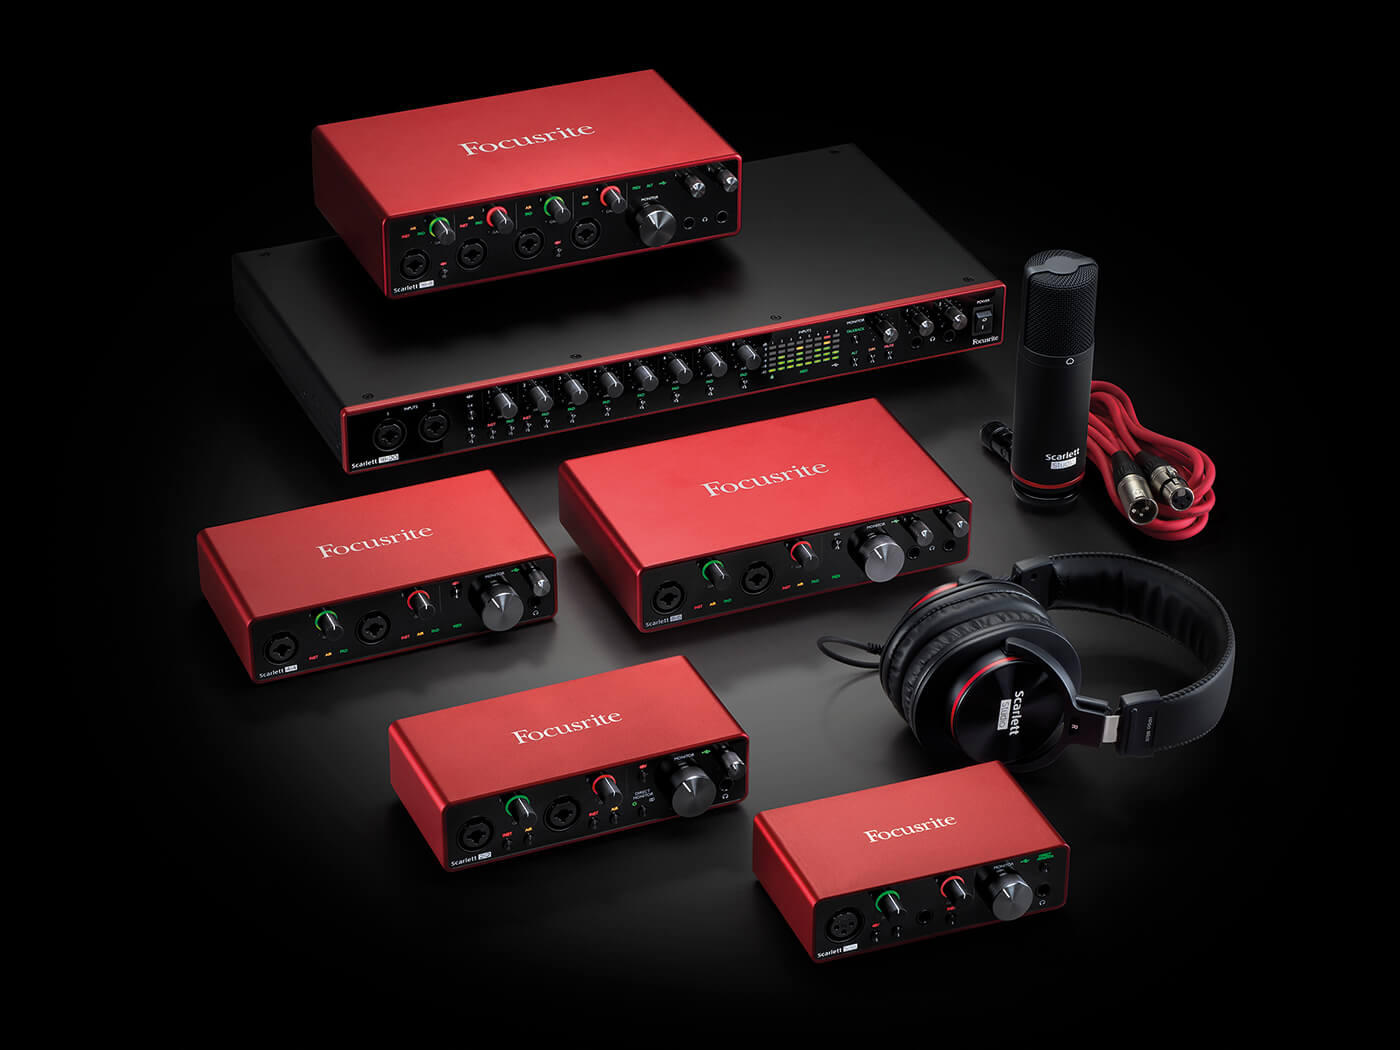 How To Setup And Configure Focusrite Scarlett 18I20 (2Nd Gen) USB Audio Interface With Pro Tools